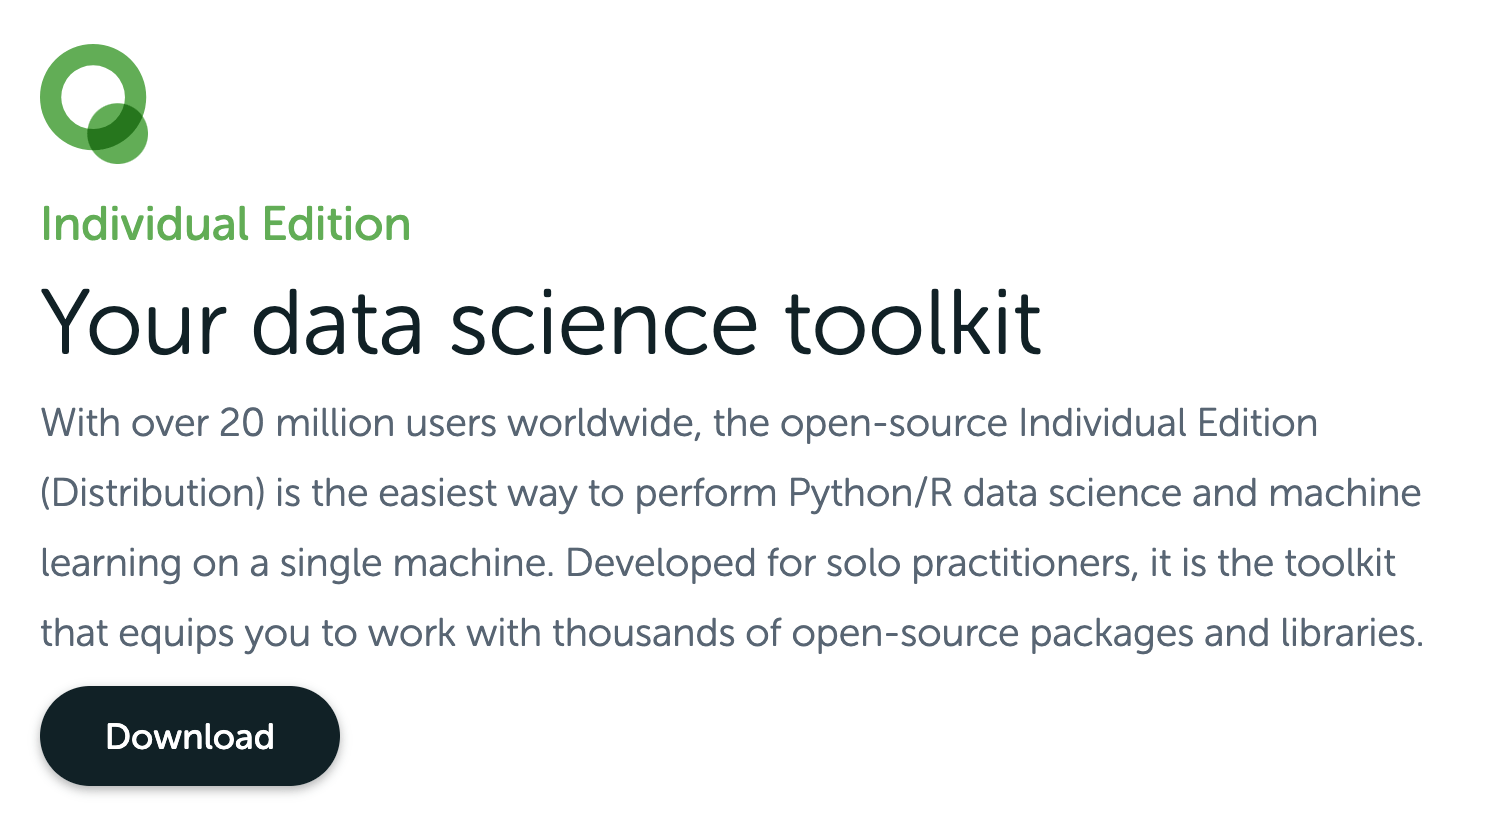 Individual edition data science toolkit download